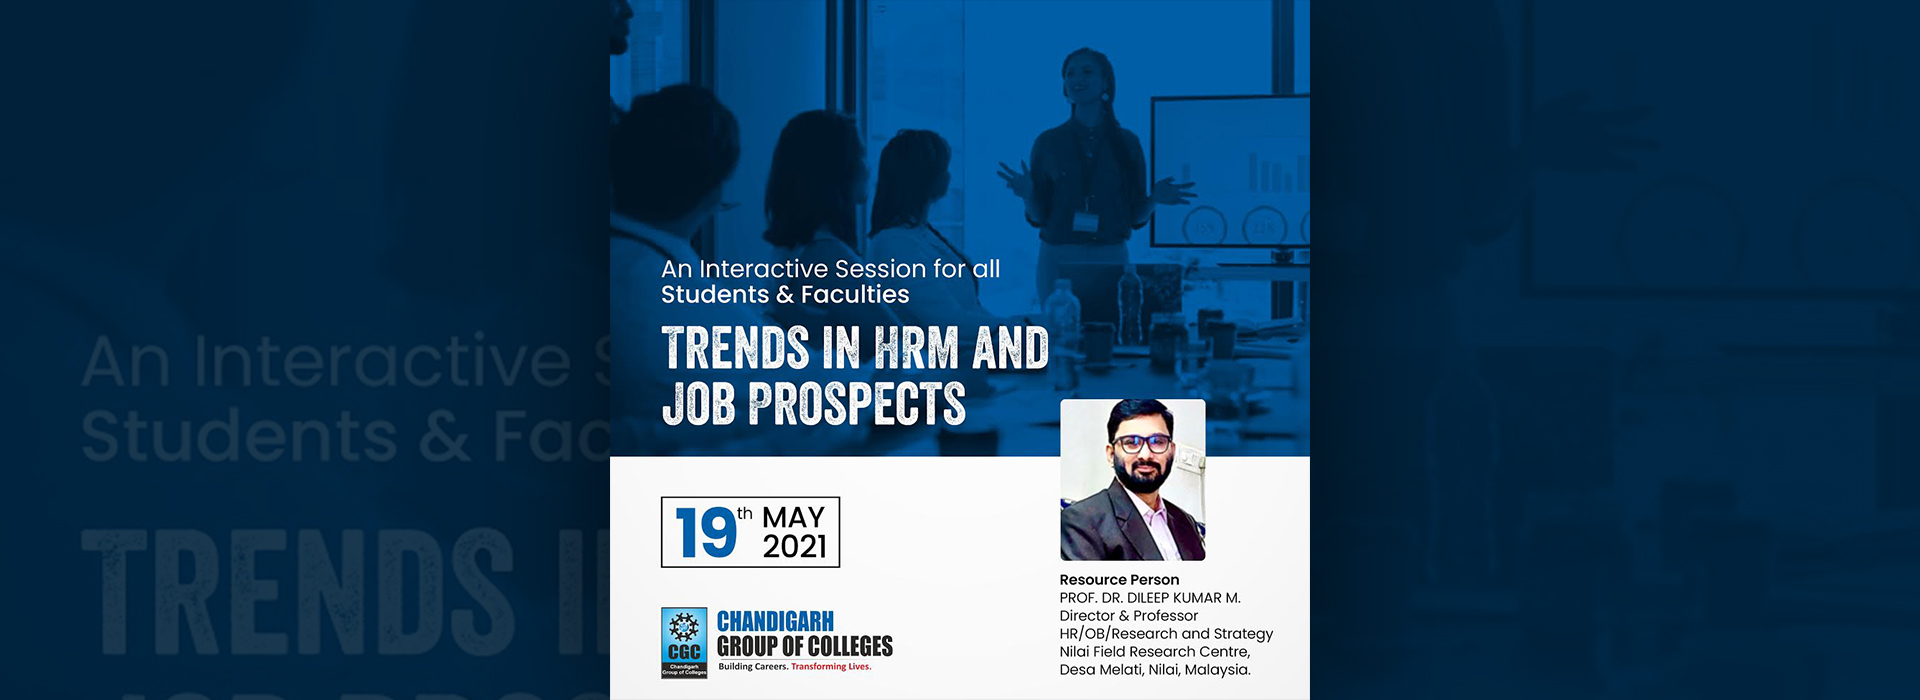 Trends in HRM & Job Prospects 